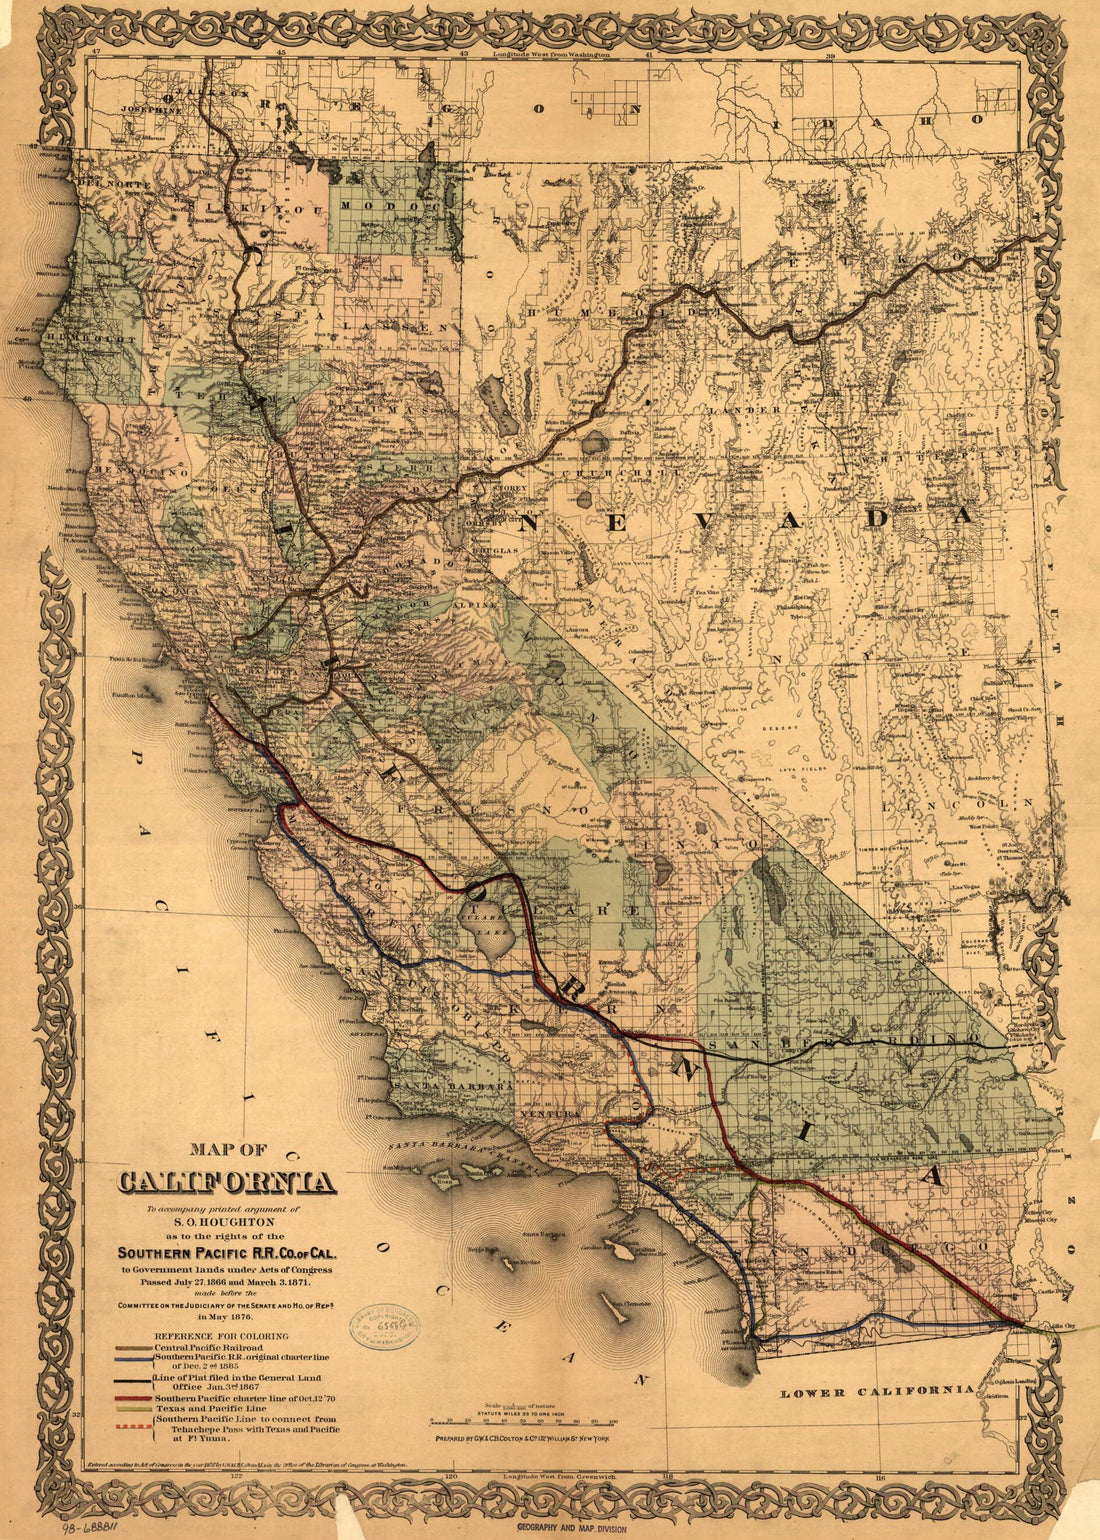 This old map of Map of California to Accompany Printed Agreement of S. O. Houghton As to the Rights of the Southern Pacific R.R. Co. OfCalifornia to Government Lands Under Acts of Congress Passed July 27, 1866 and March 3, 1871 Made Before the Committee 